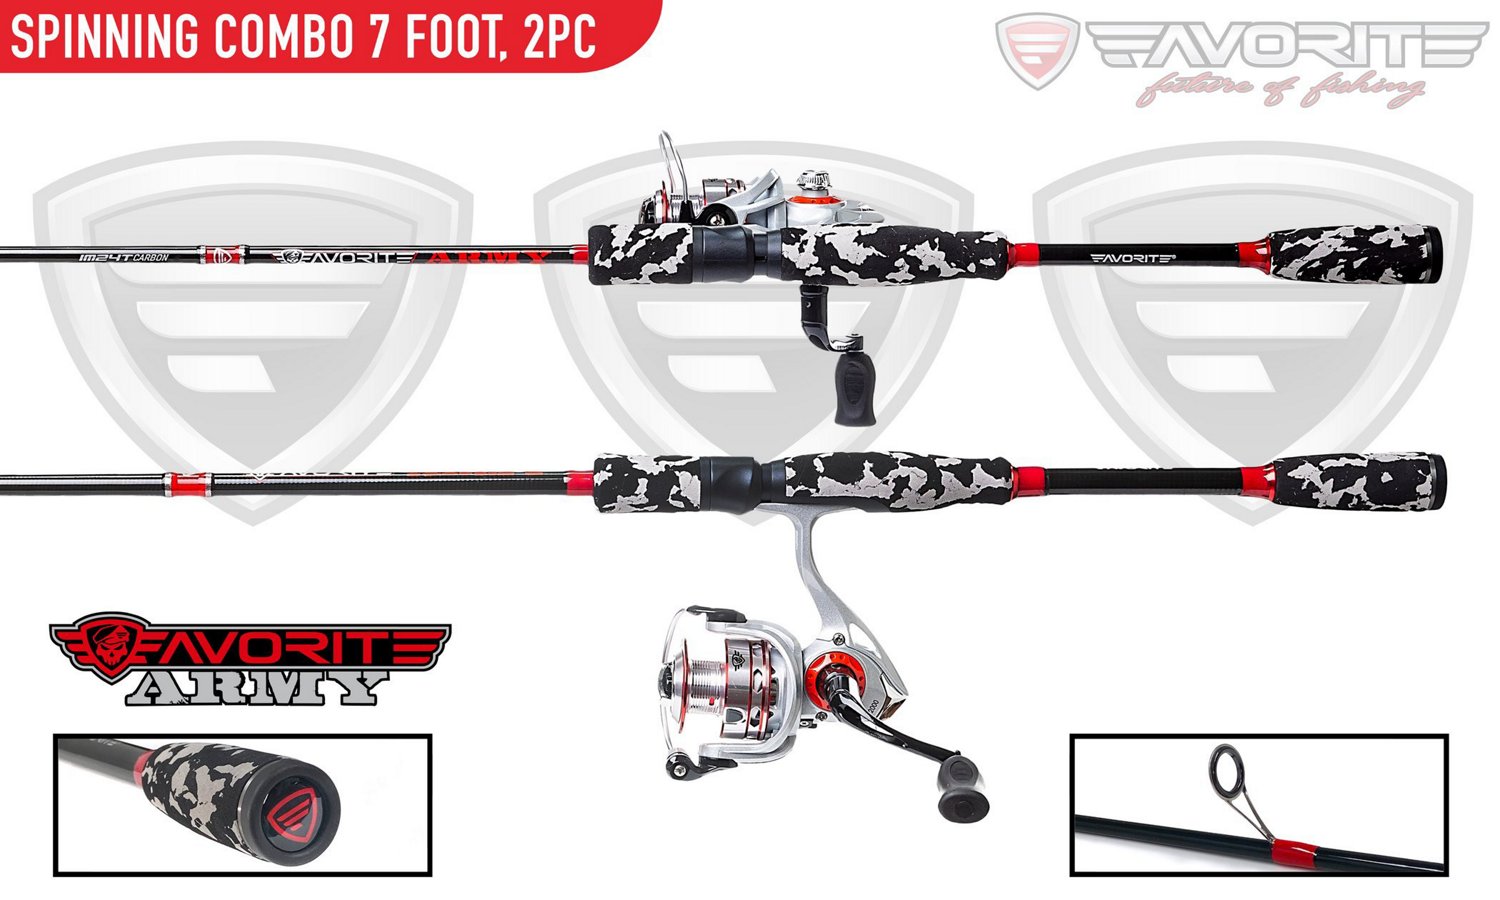 Favorite Fishing “Favorite Army” 10 6 ft Spinning Rod and Reel Combo